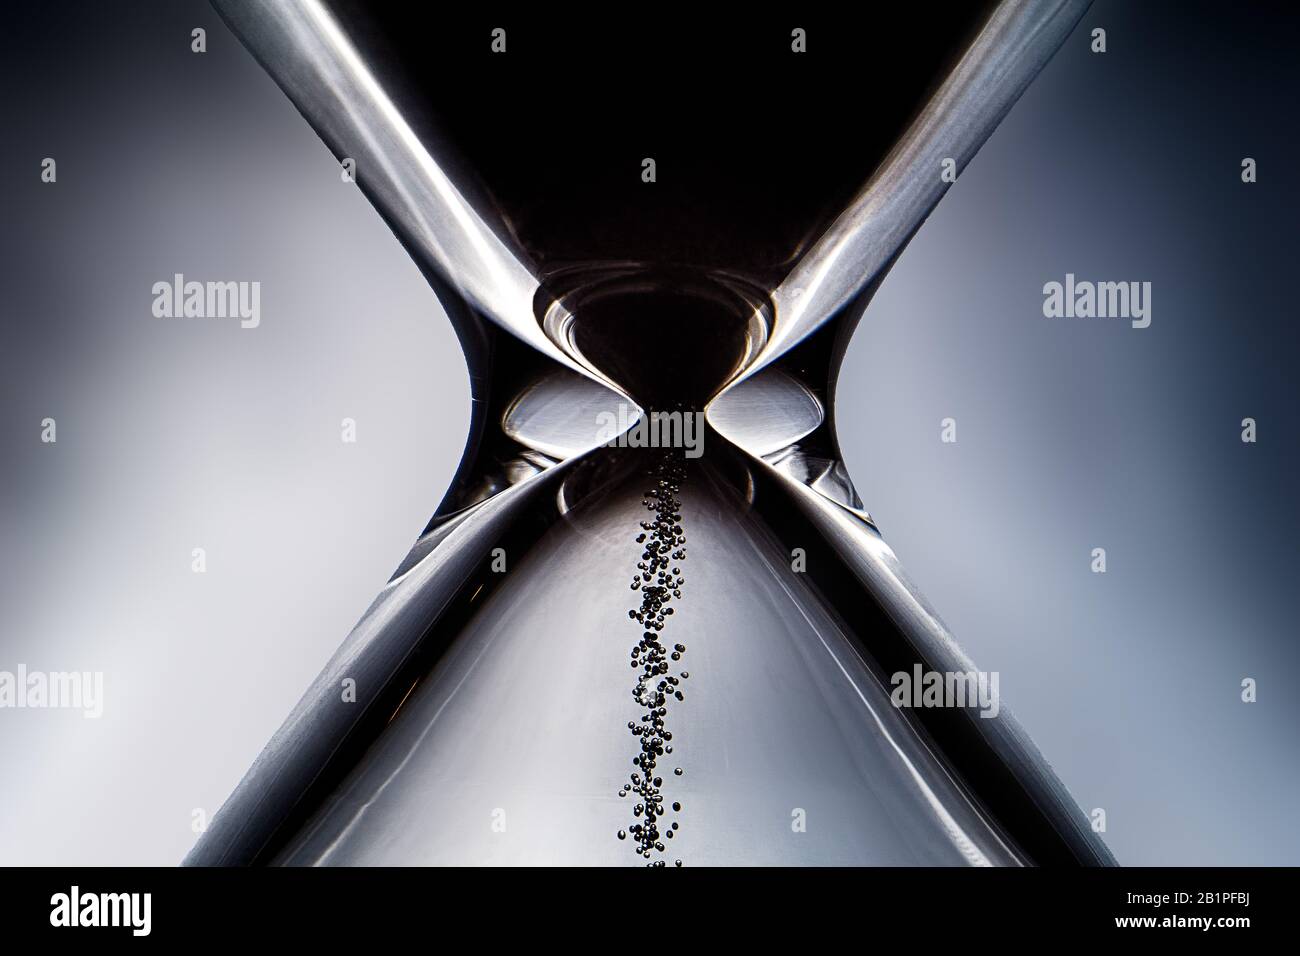 Minimalist close up of hourglass with black sand and light coming from behind, reflection on surface Stock Photo